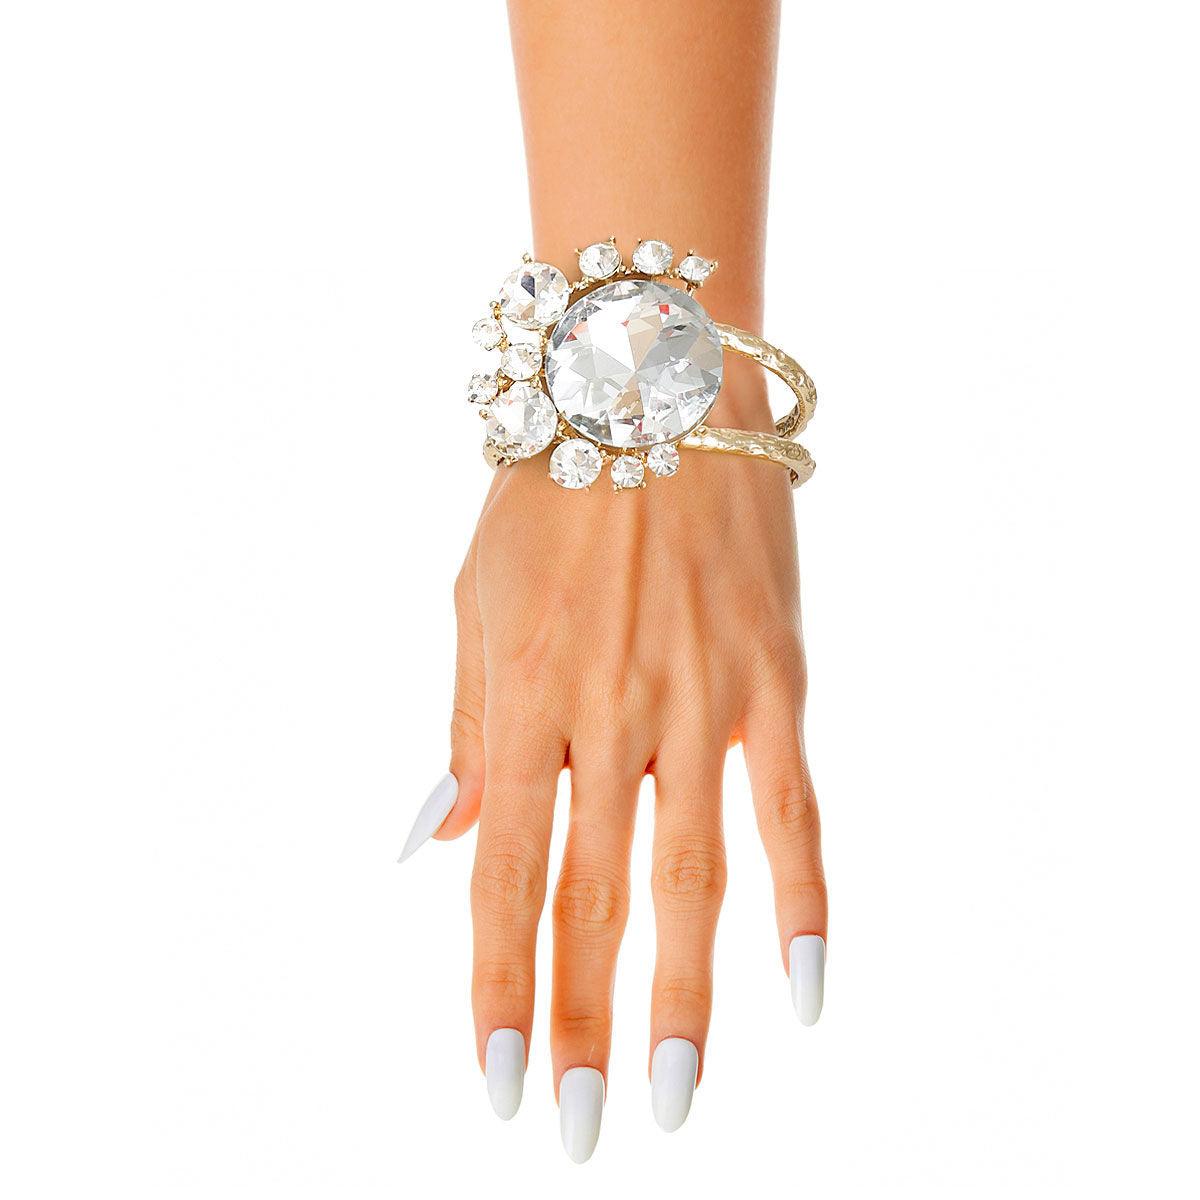 Make a Statement: Must-Have Clear/Gold Cuff Bracelet for a Blissful Wrist